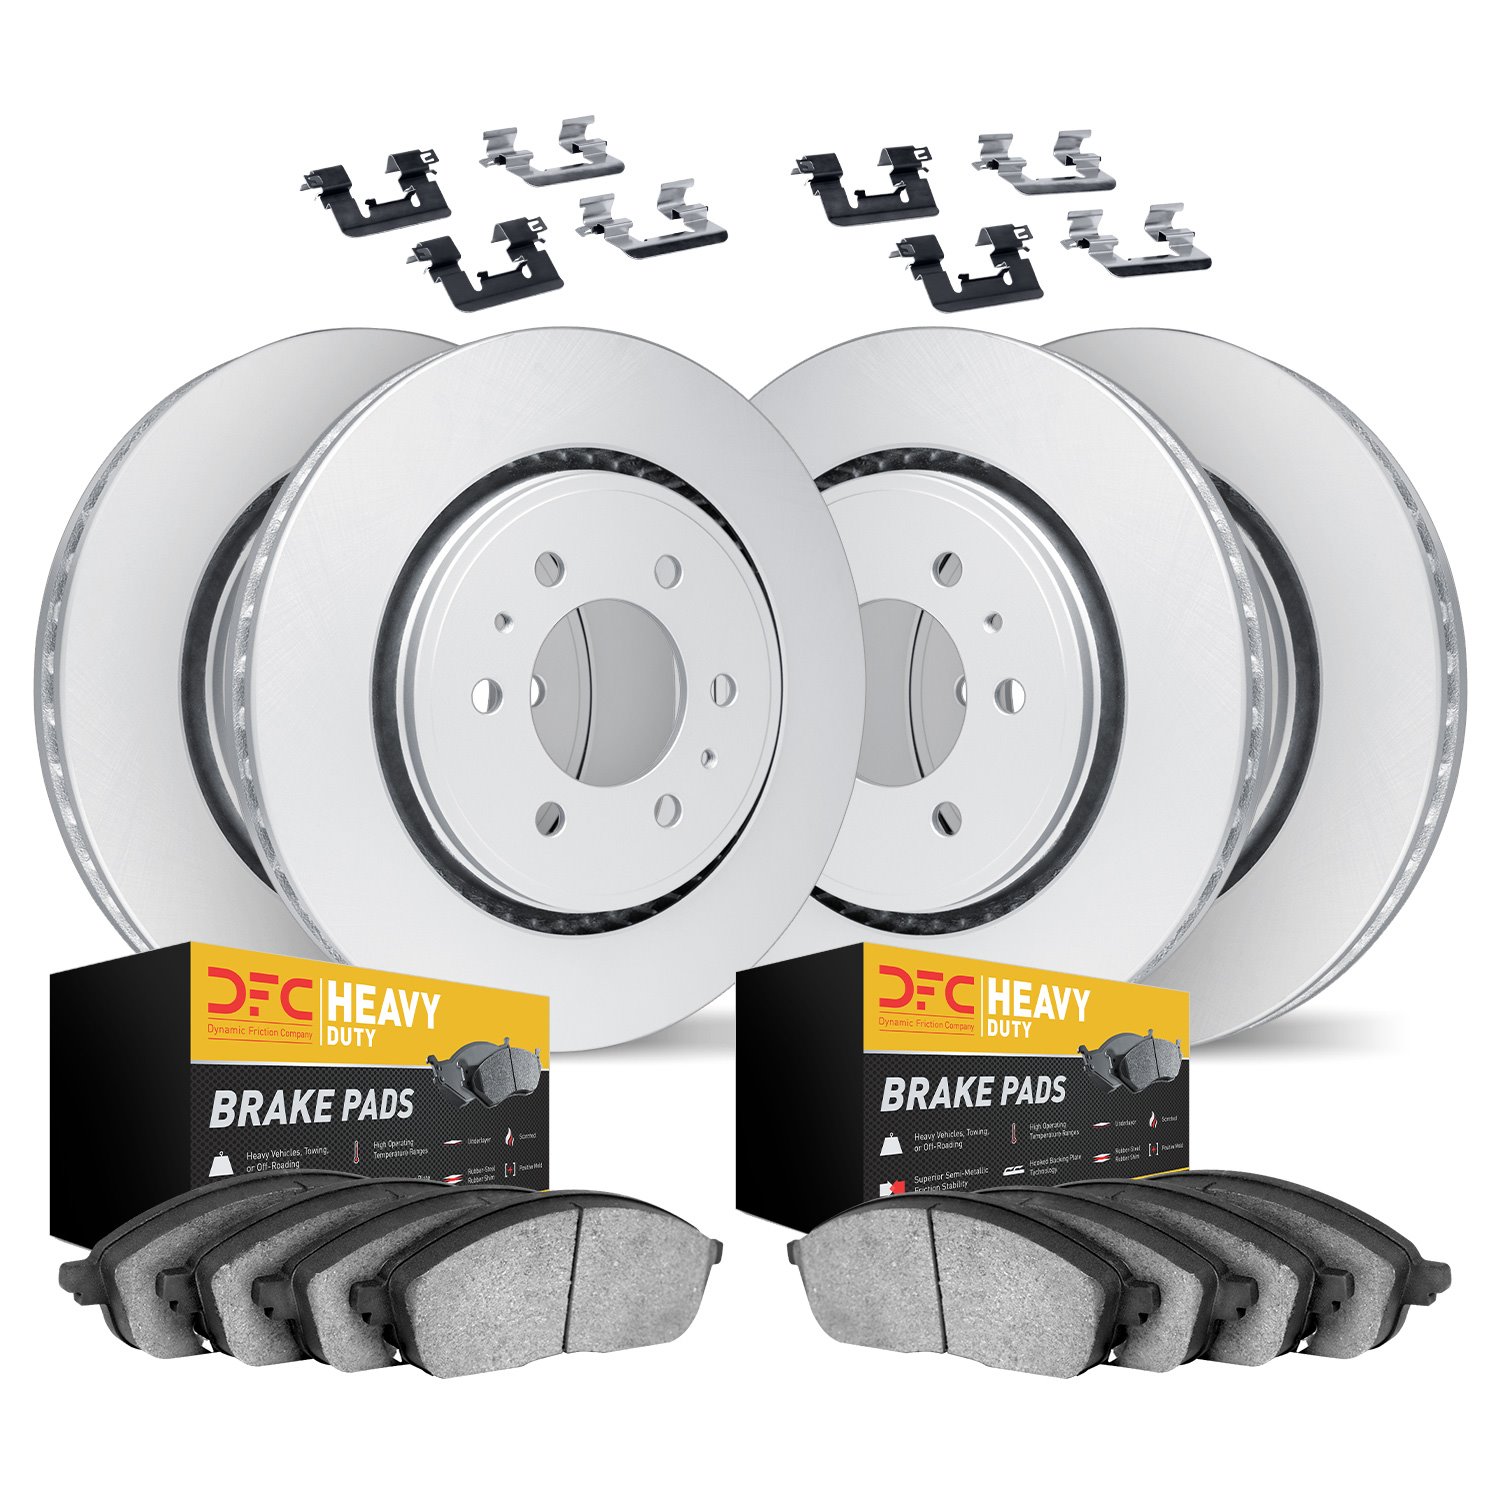 4214-67002 Geospec Brake Rotors w/Heavy-Duty Brake Pads & Hardware, Fits Select Infiniti/Nissan, Position: Front and Rear